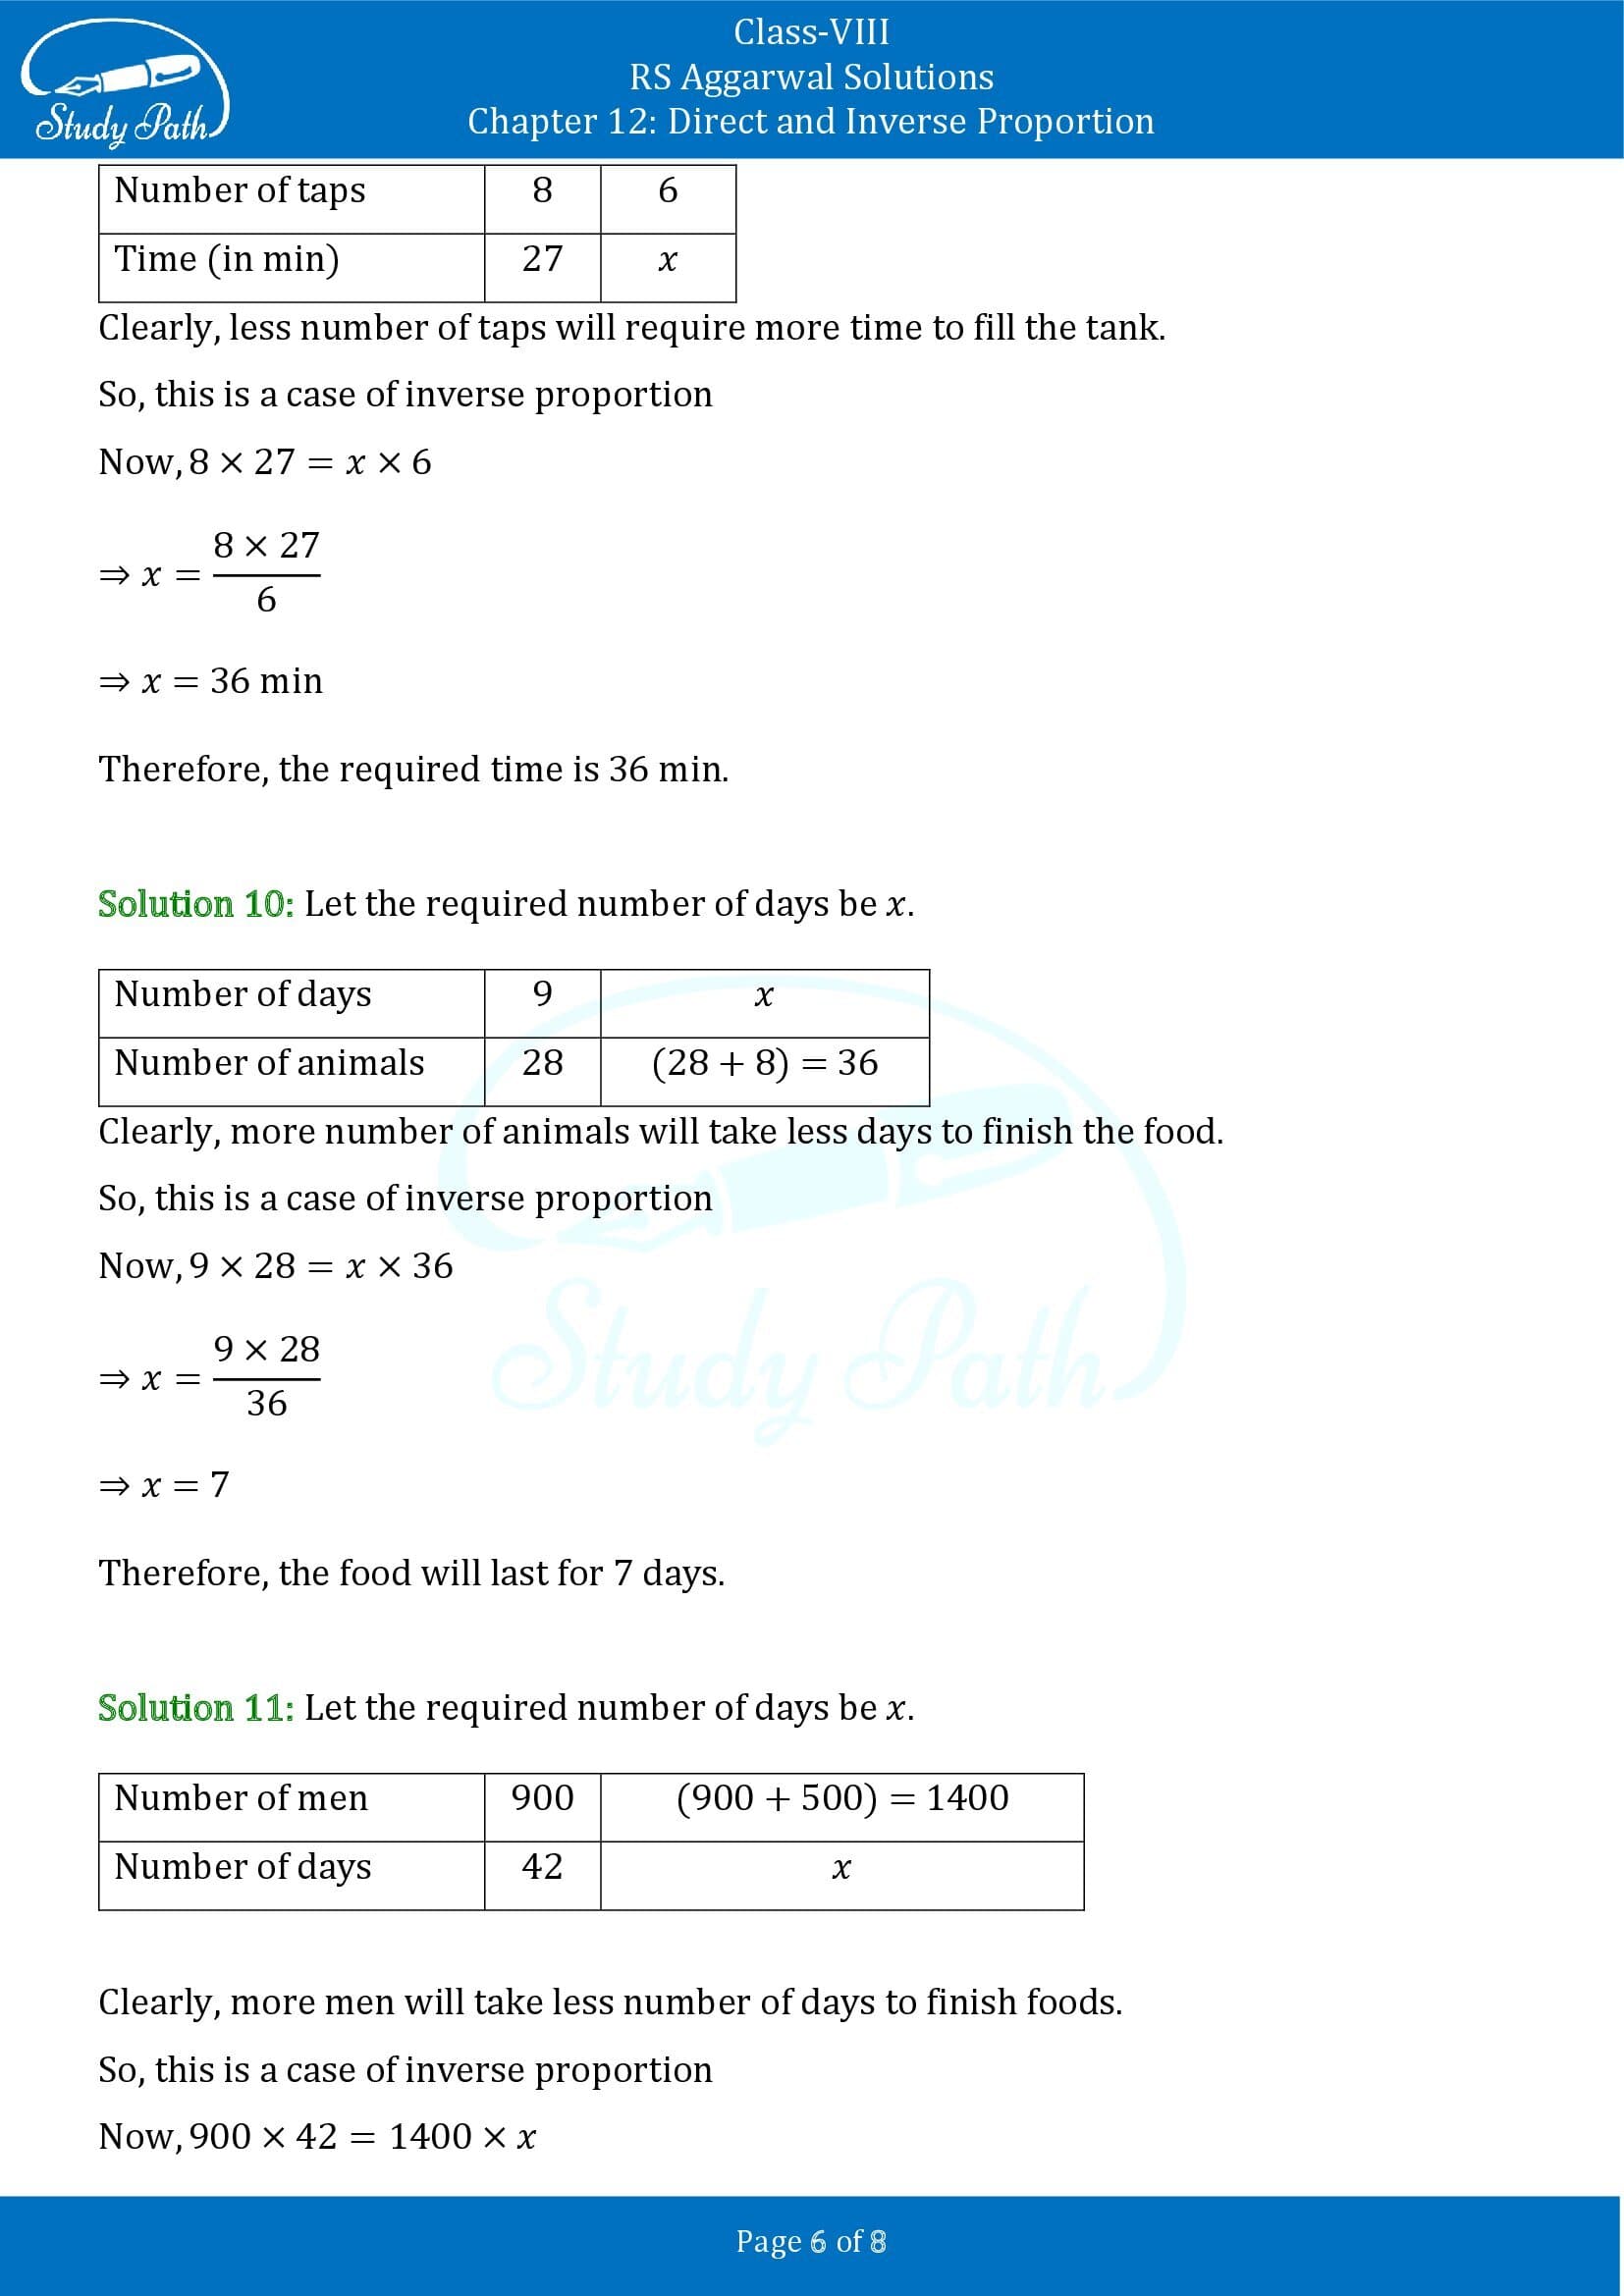 RS Aggarwal Solutions Class 8 Chapter 12 Direct and Inverse Proportion Exercise 12B 00006